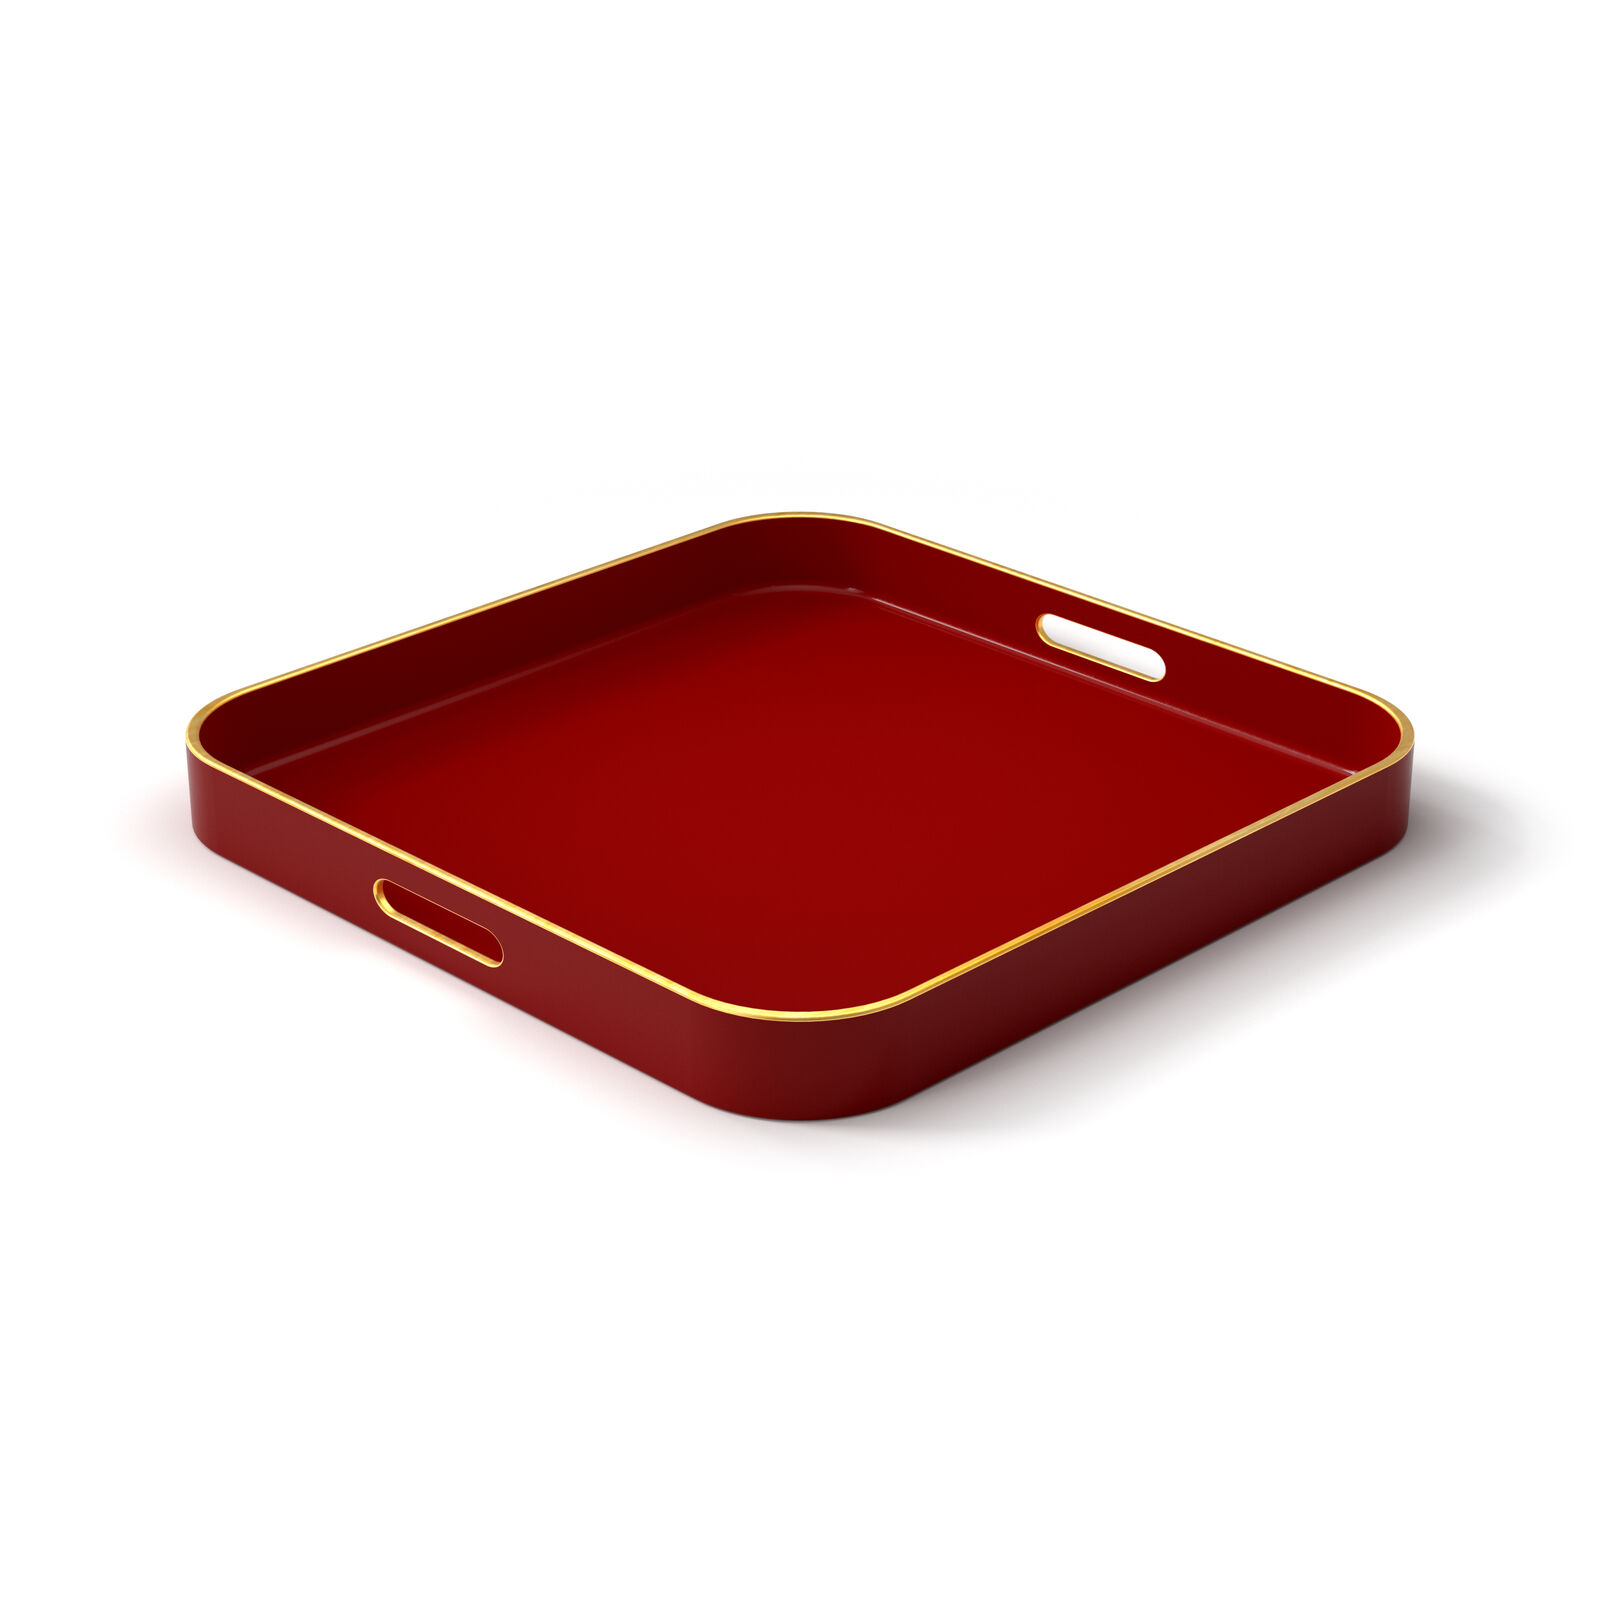 American Atelier Red Serving Square Tray with Gold Trimming & Handles